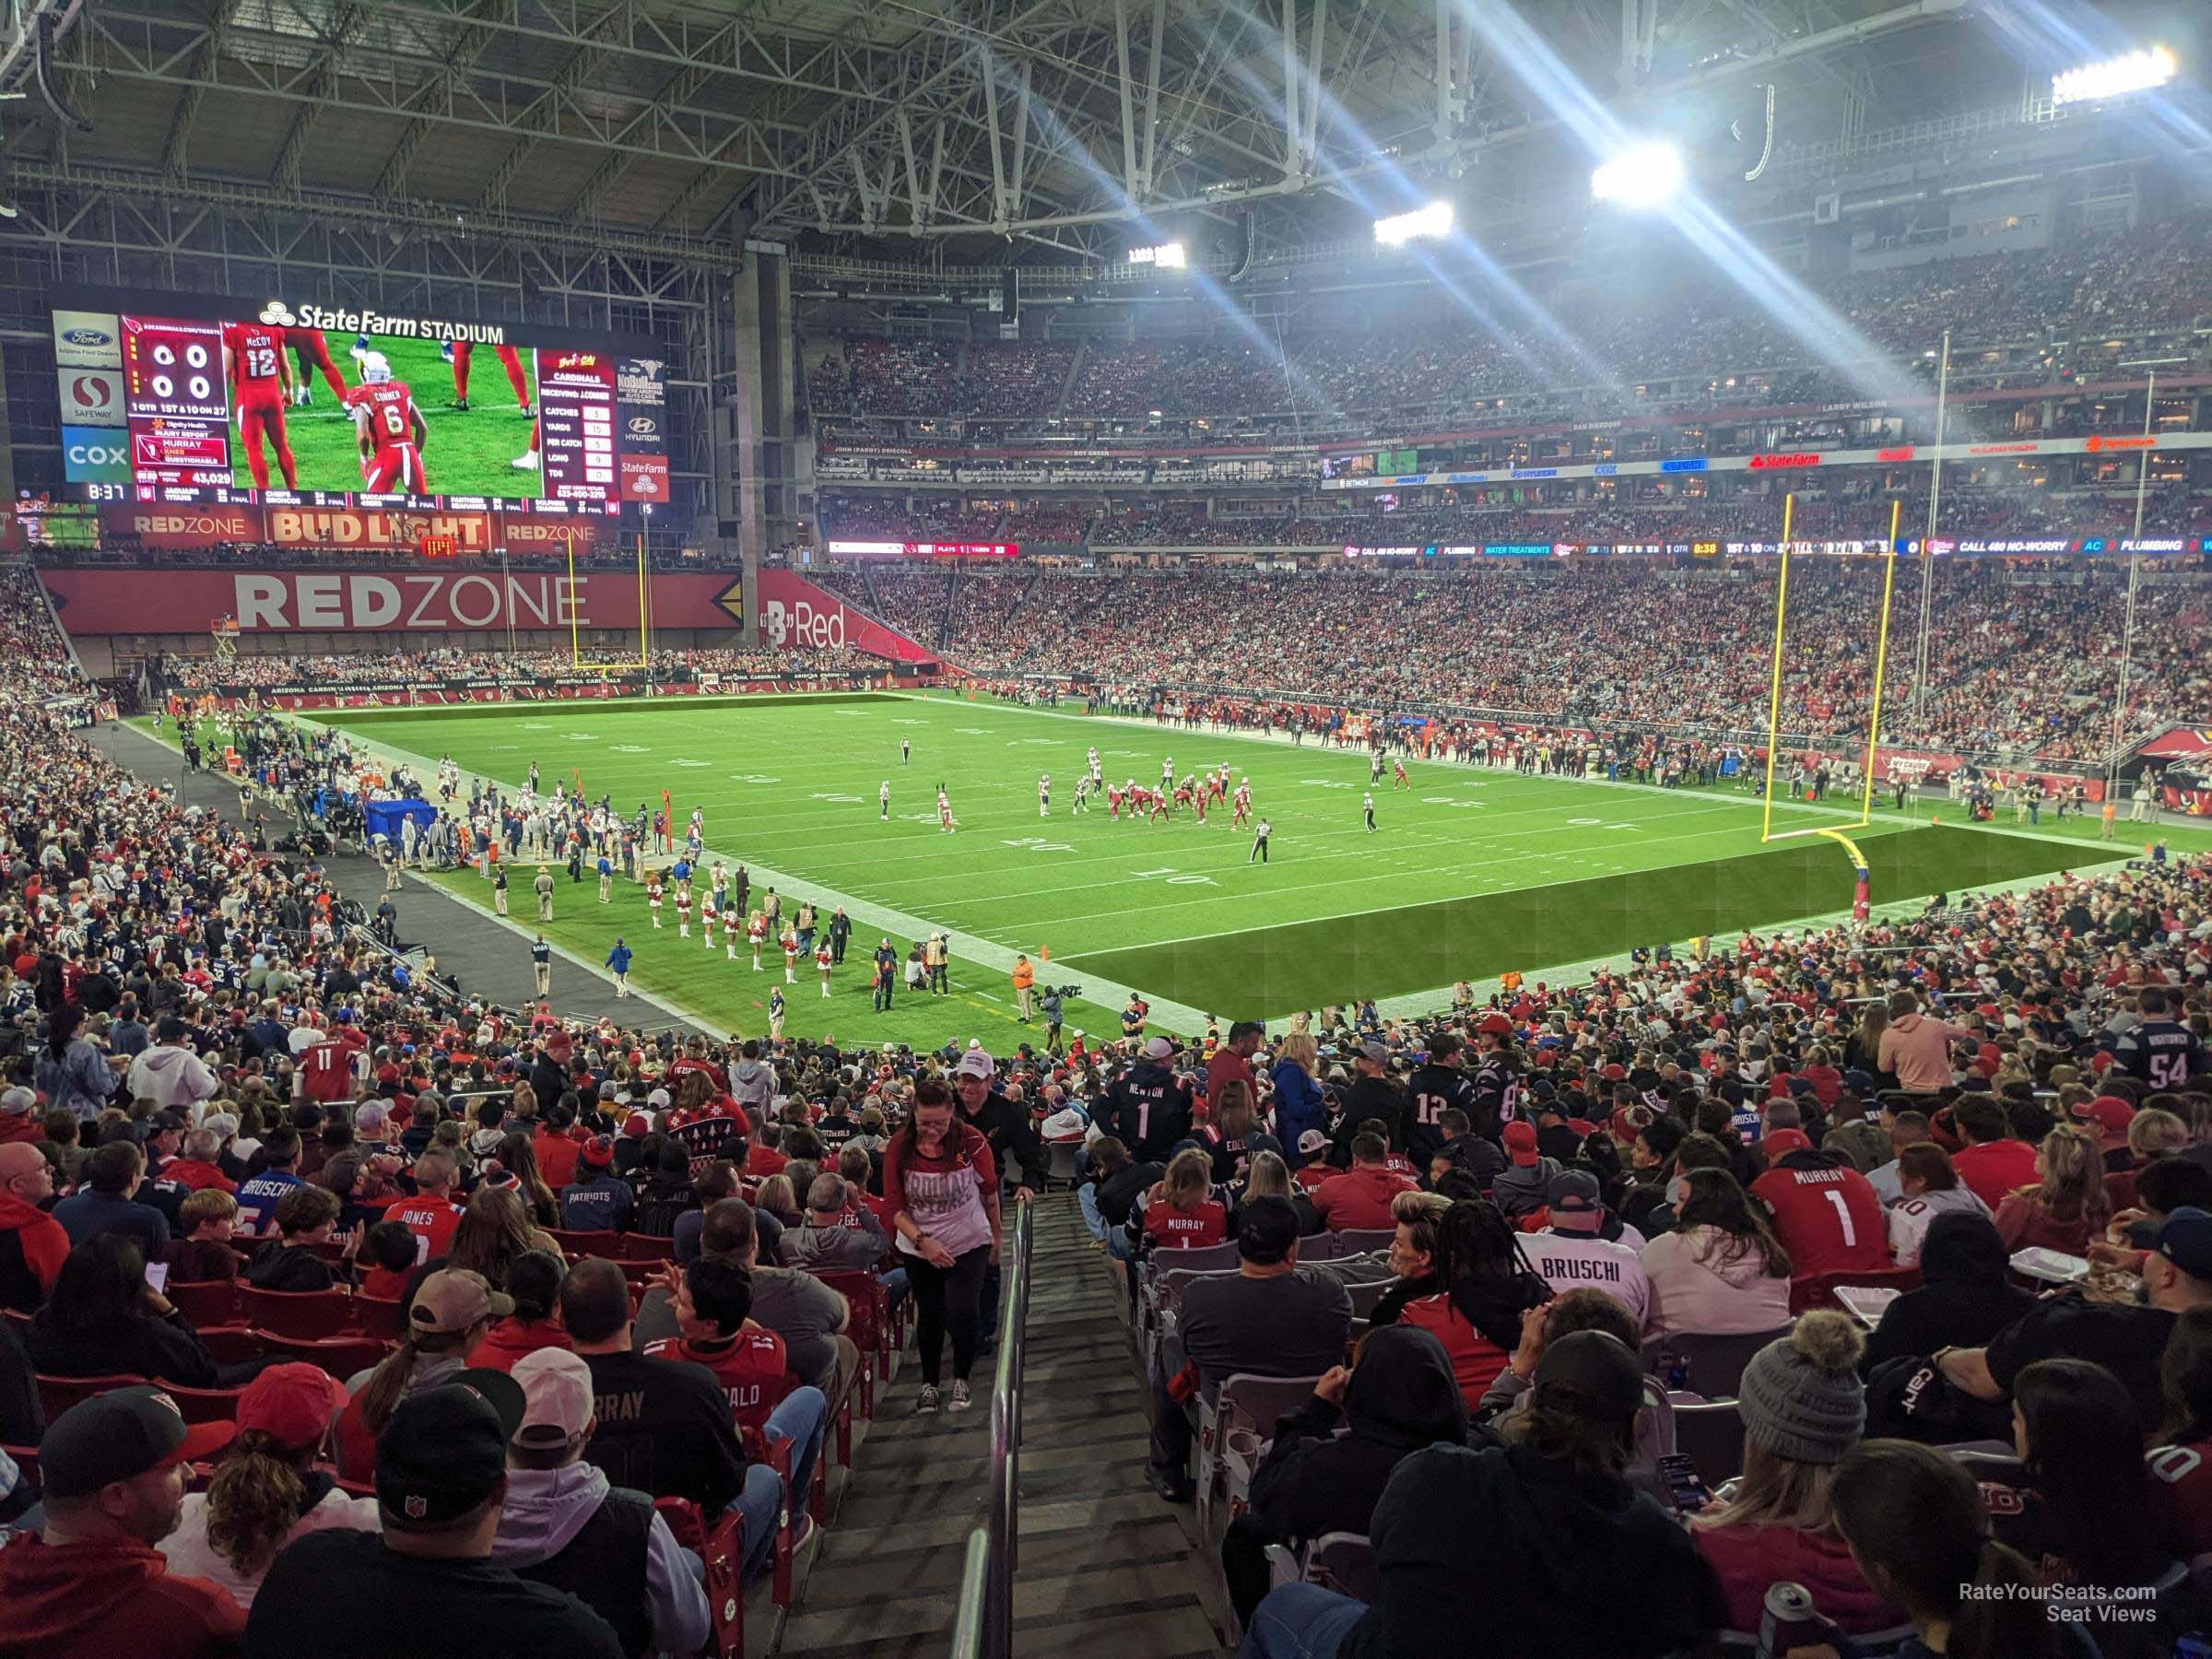 Section 123 at State Farm Stadium - RateYourSeats.com